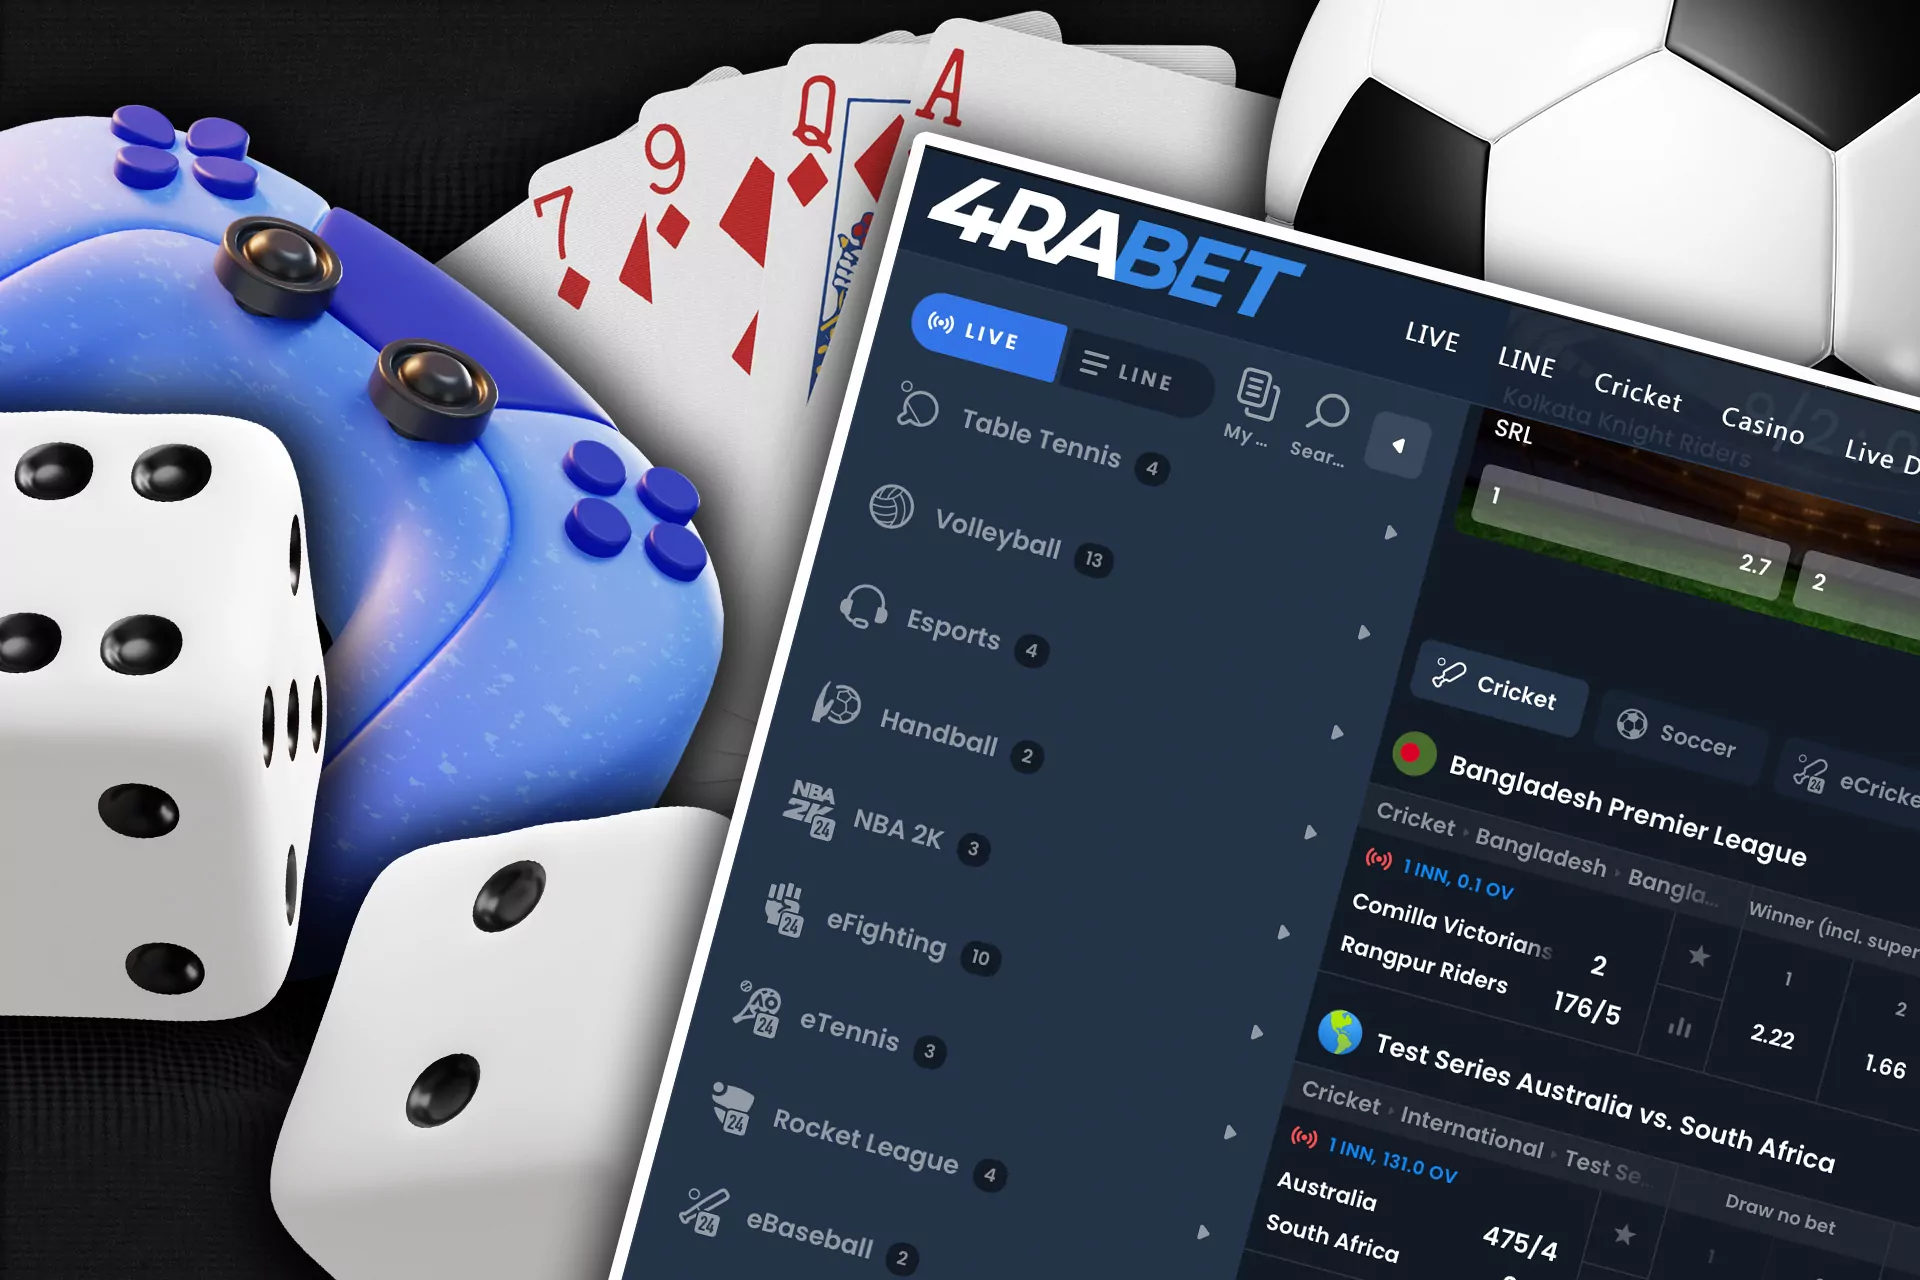 You'll find a lot of entertainment such as sports and esports betting, casino games and others at 4rabet.